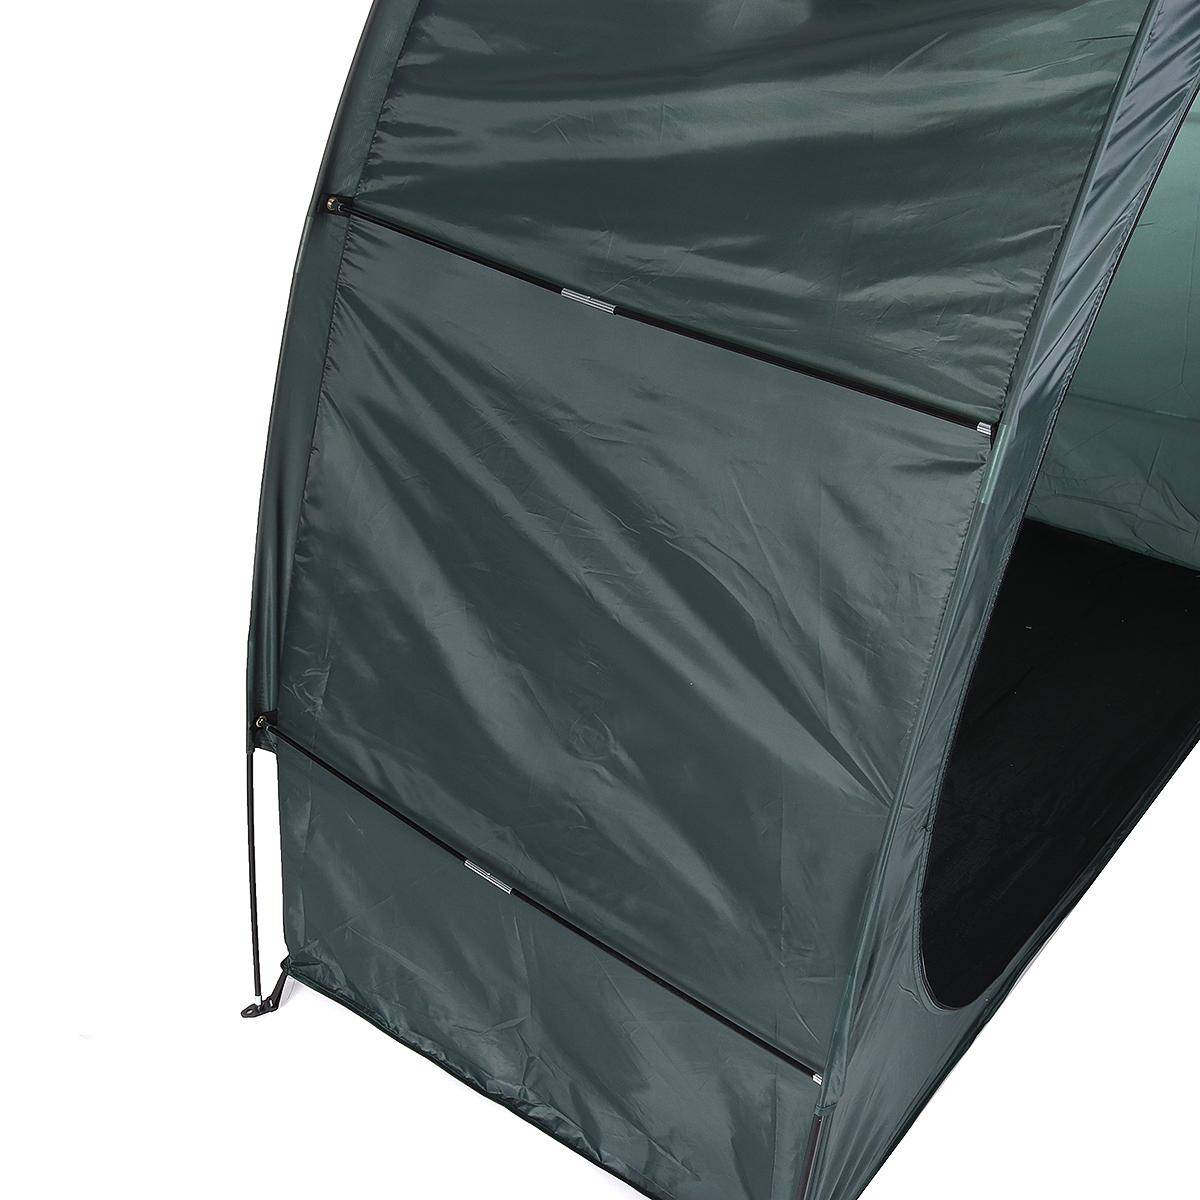 Shed Bike Cave Tidy Tent Bicycle Garden Storage Waterproof Cover Completely Seal 6